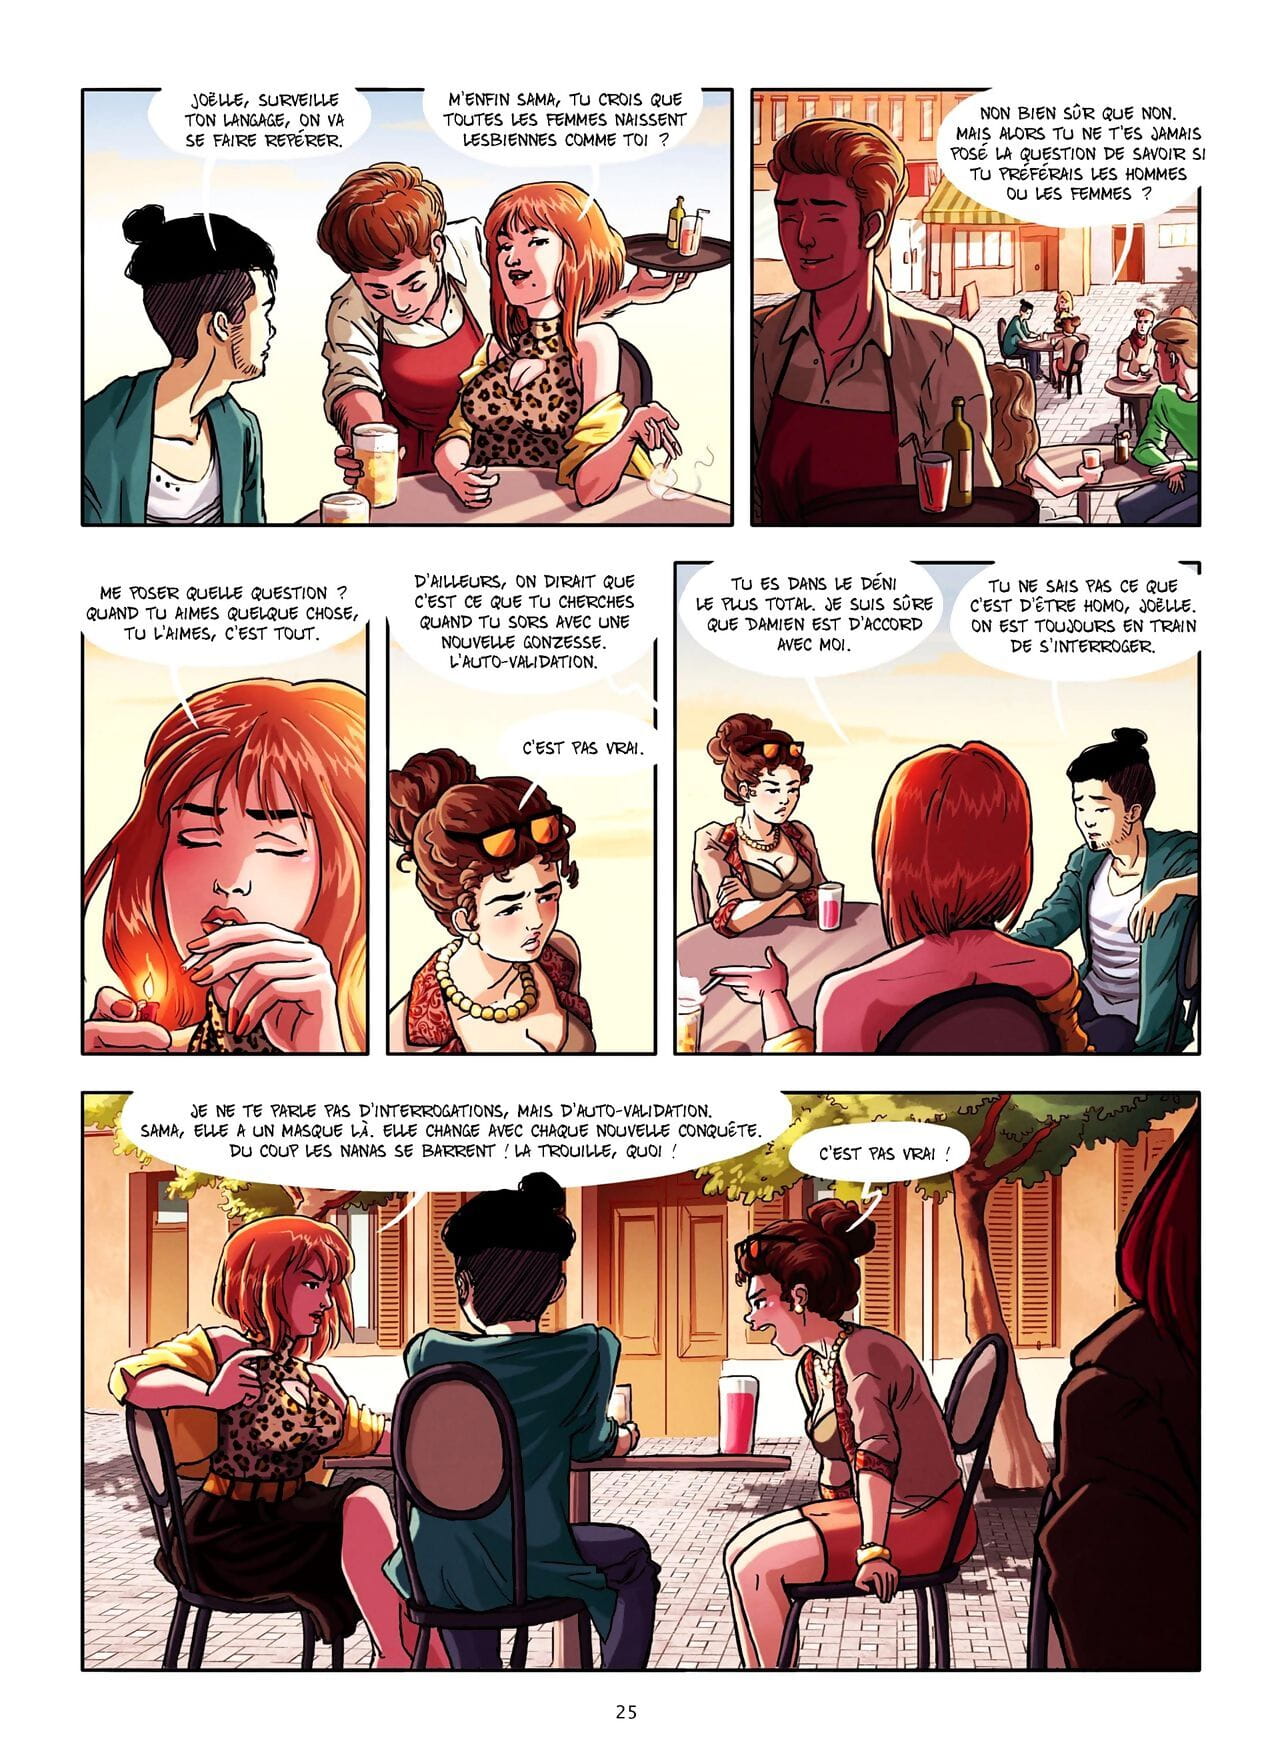 narcisse phần 2 page 1